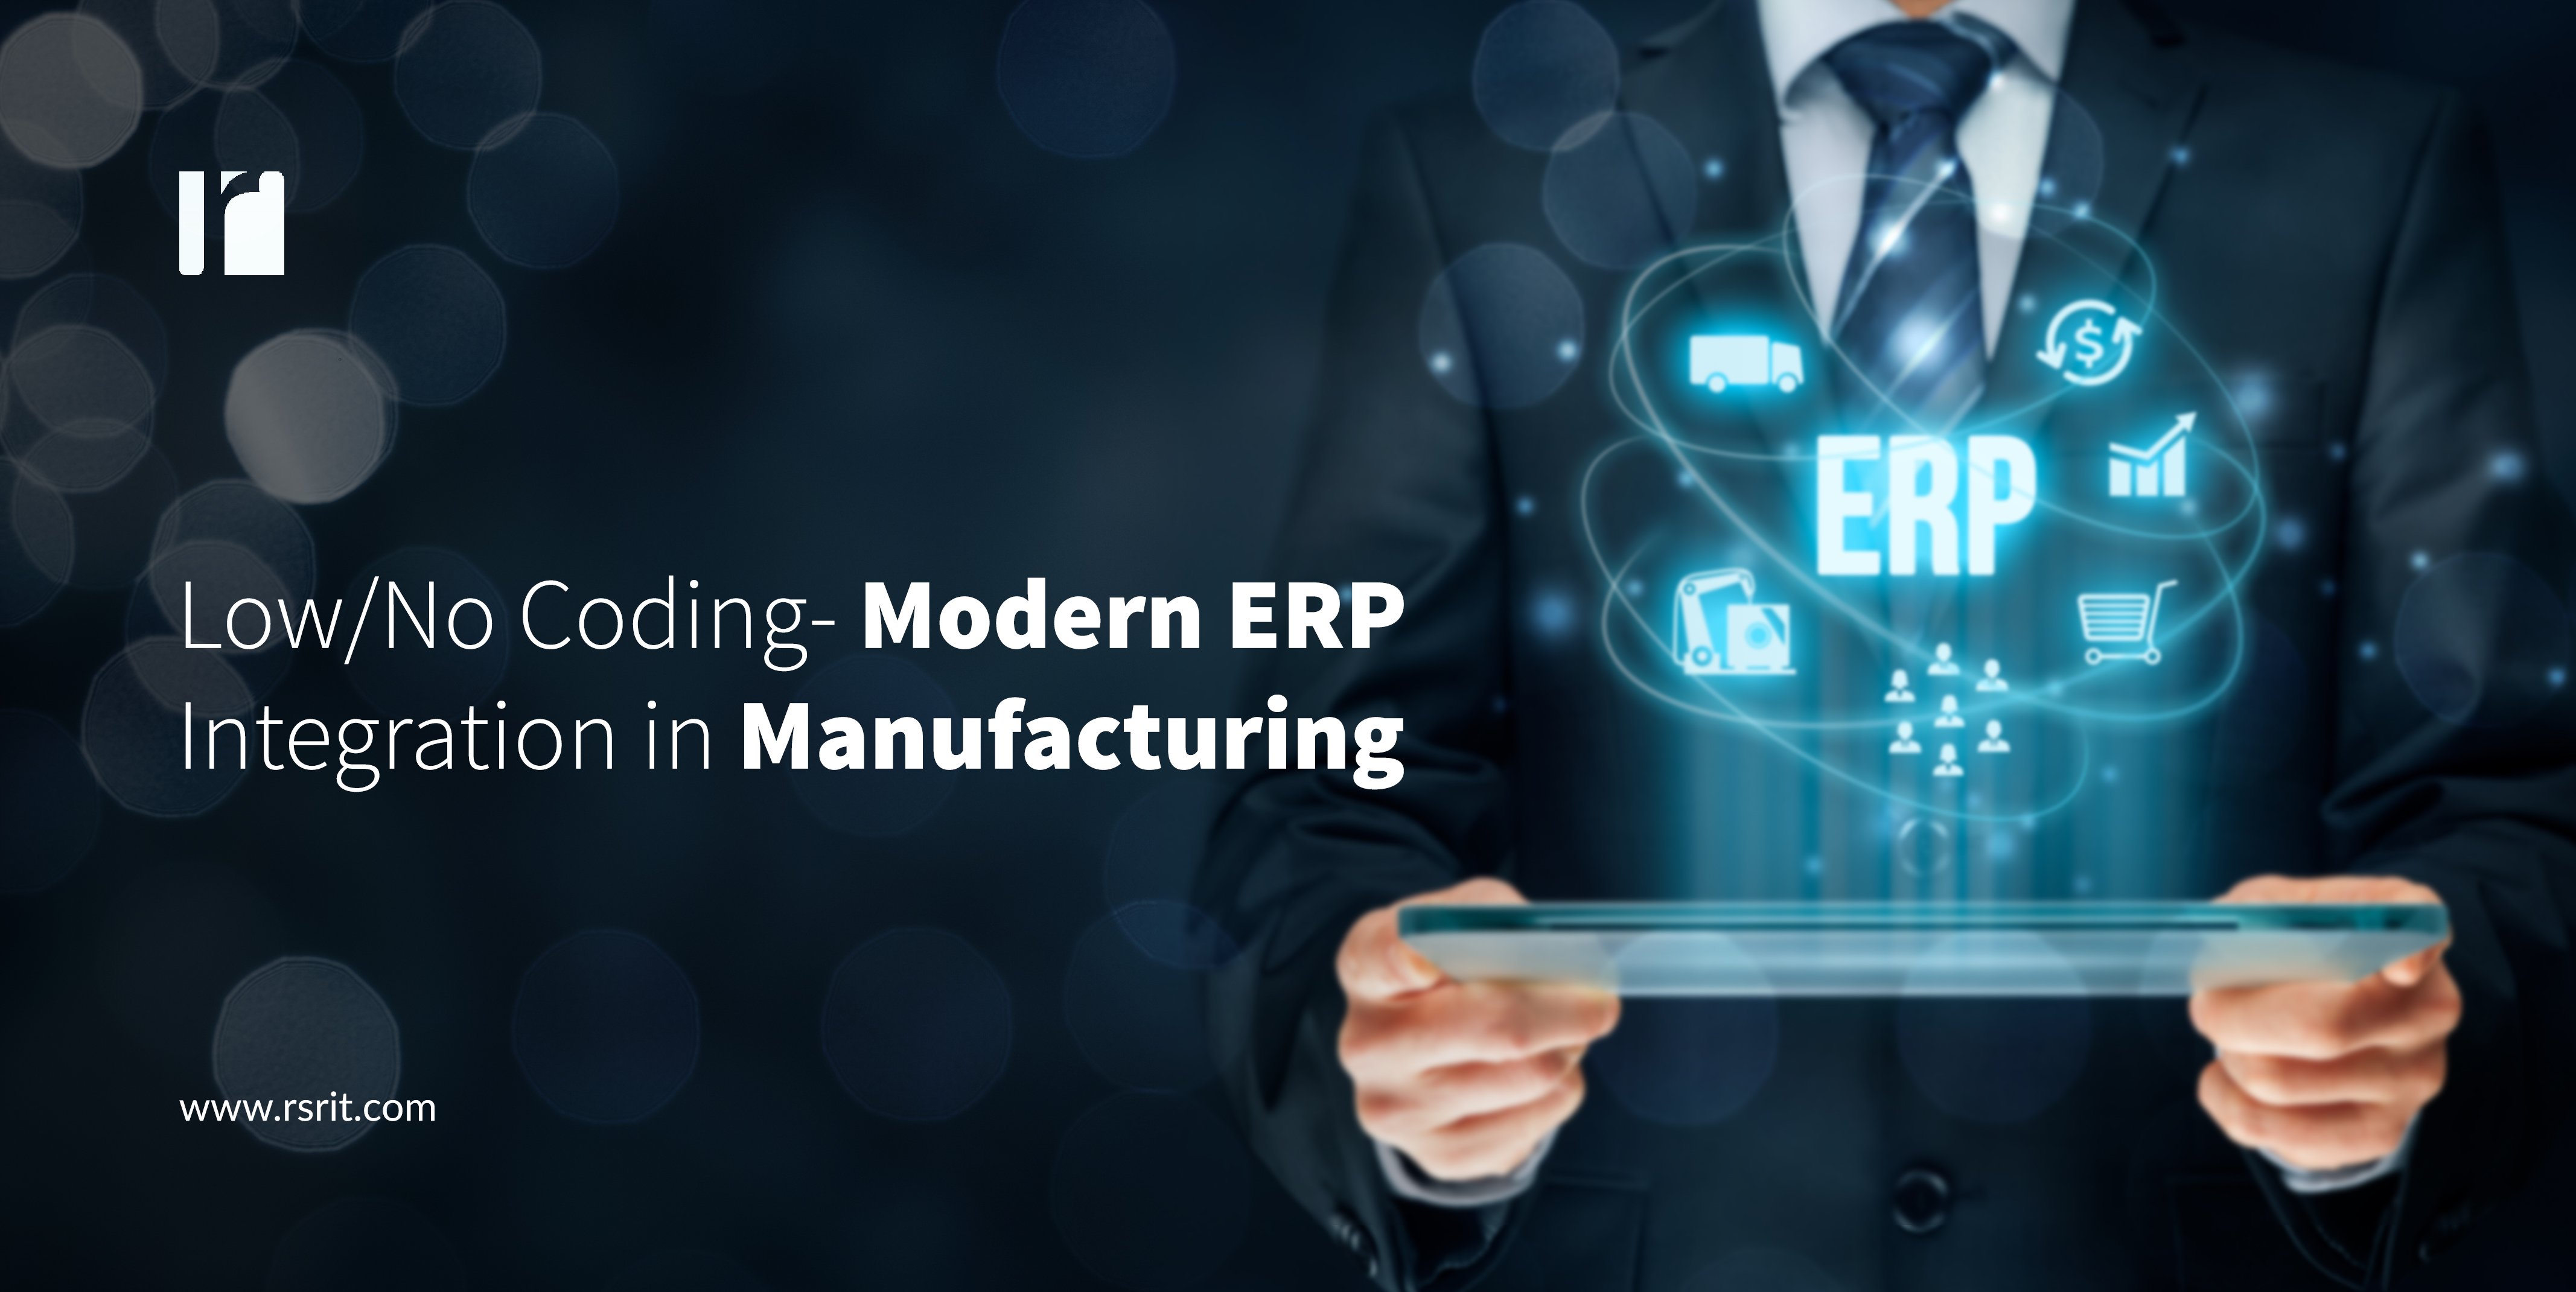 Low/No Coding - Modern ERP Integration in Manufacturing